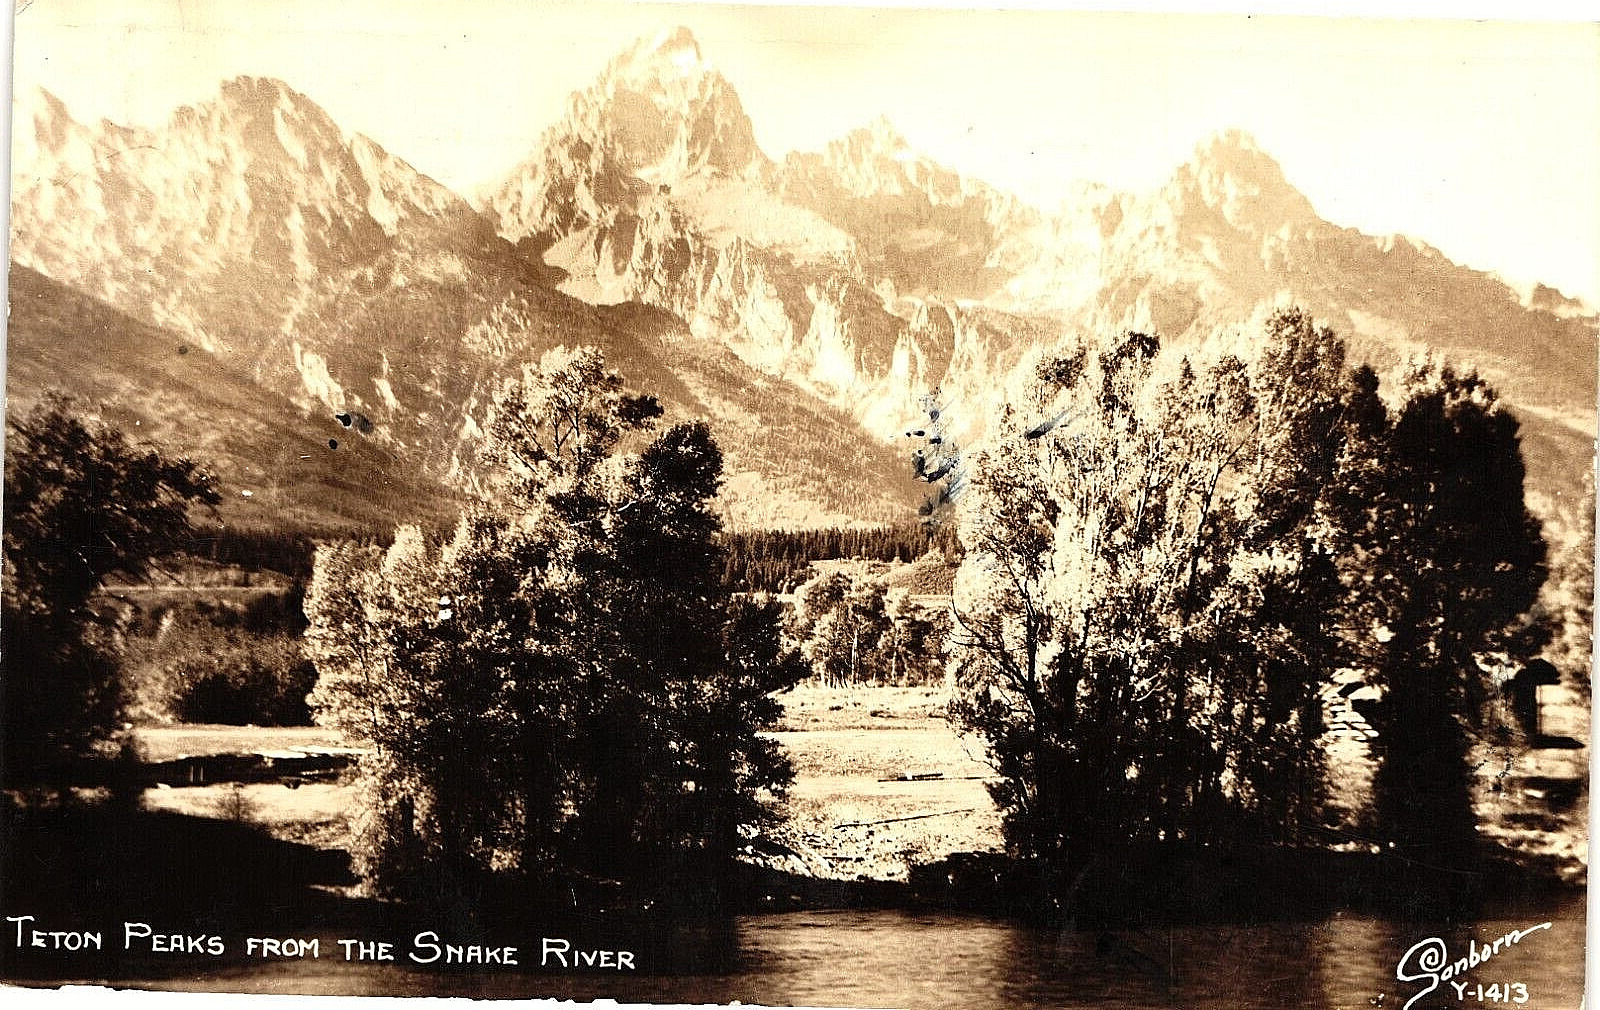 Teton Peaks Seen from Snake River Real Photo RPPC Postcard Posted 1941